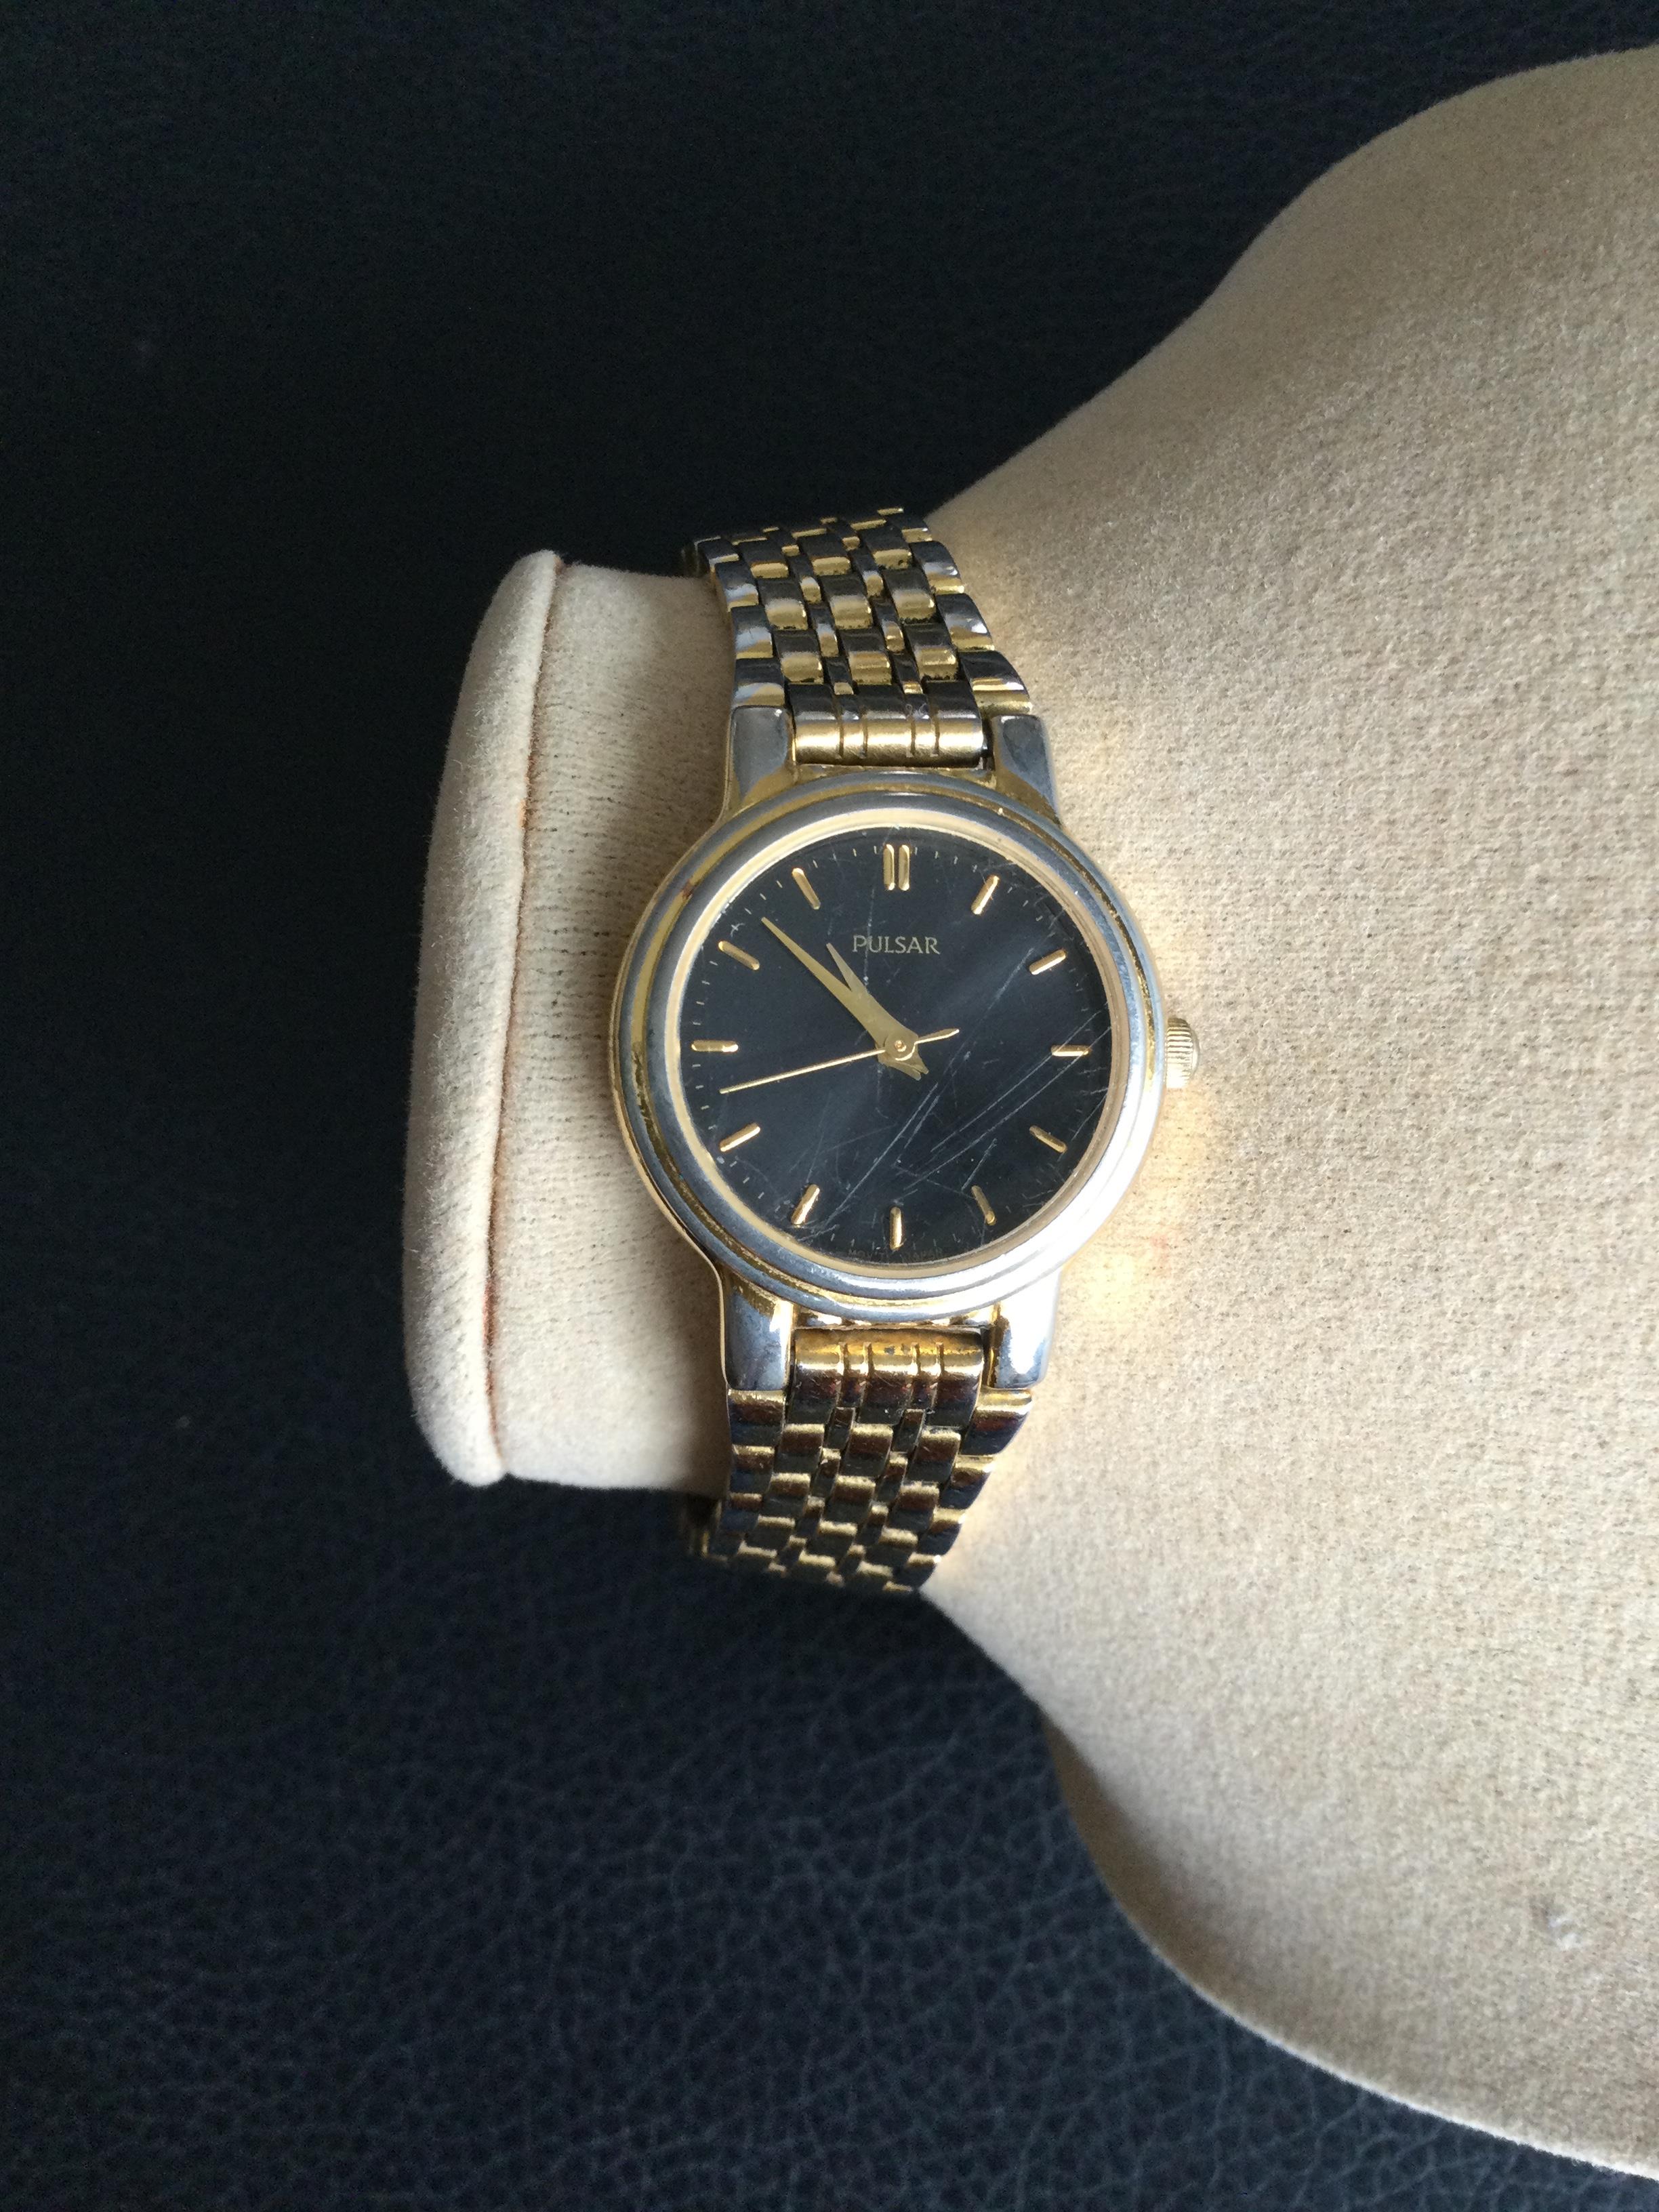 Lovely Pulsar Gold Plated Ladies Wristwatch (GS 44) - Image 4 of 6